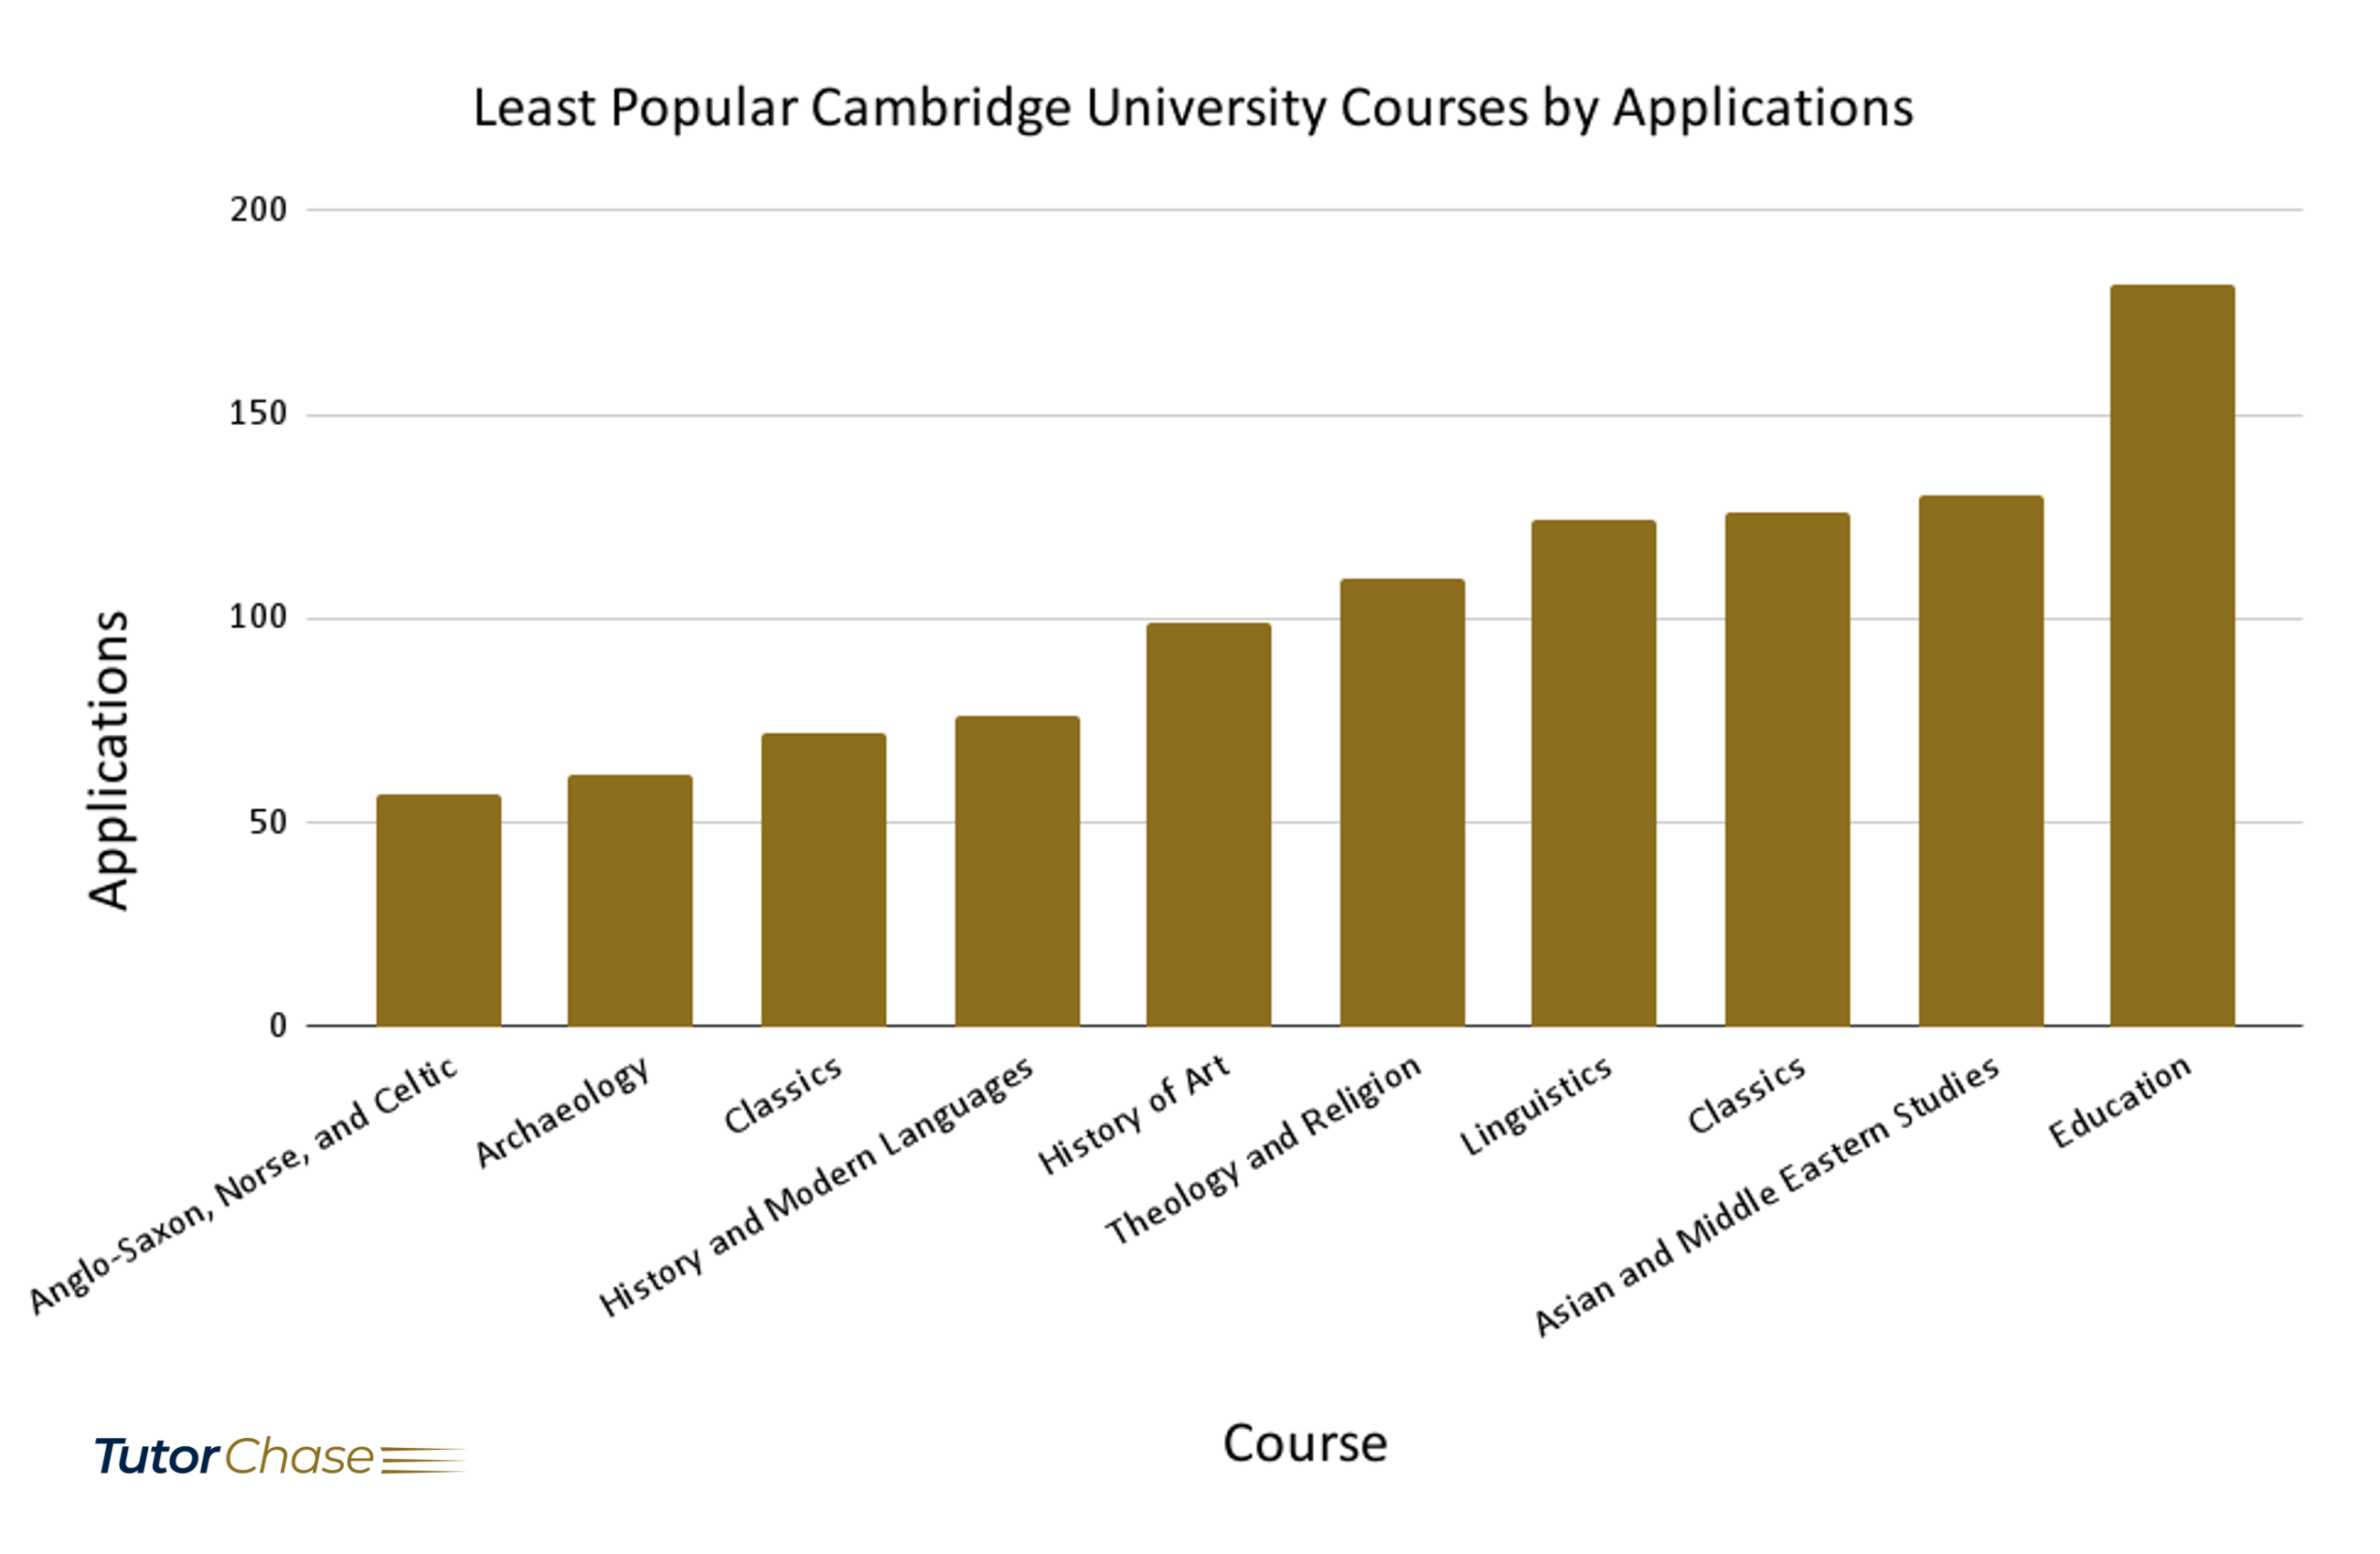 The Least Popular Cambridge University Courses by Applications